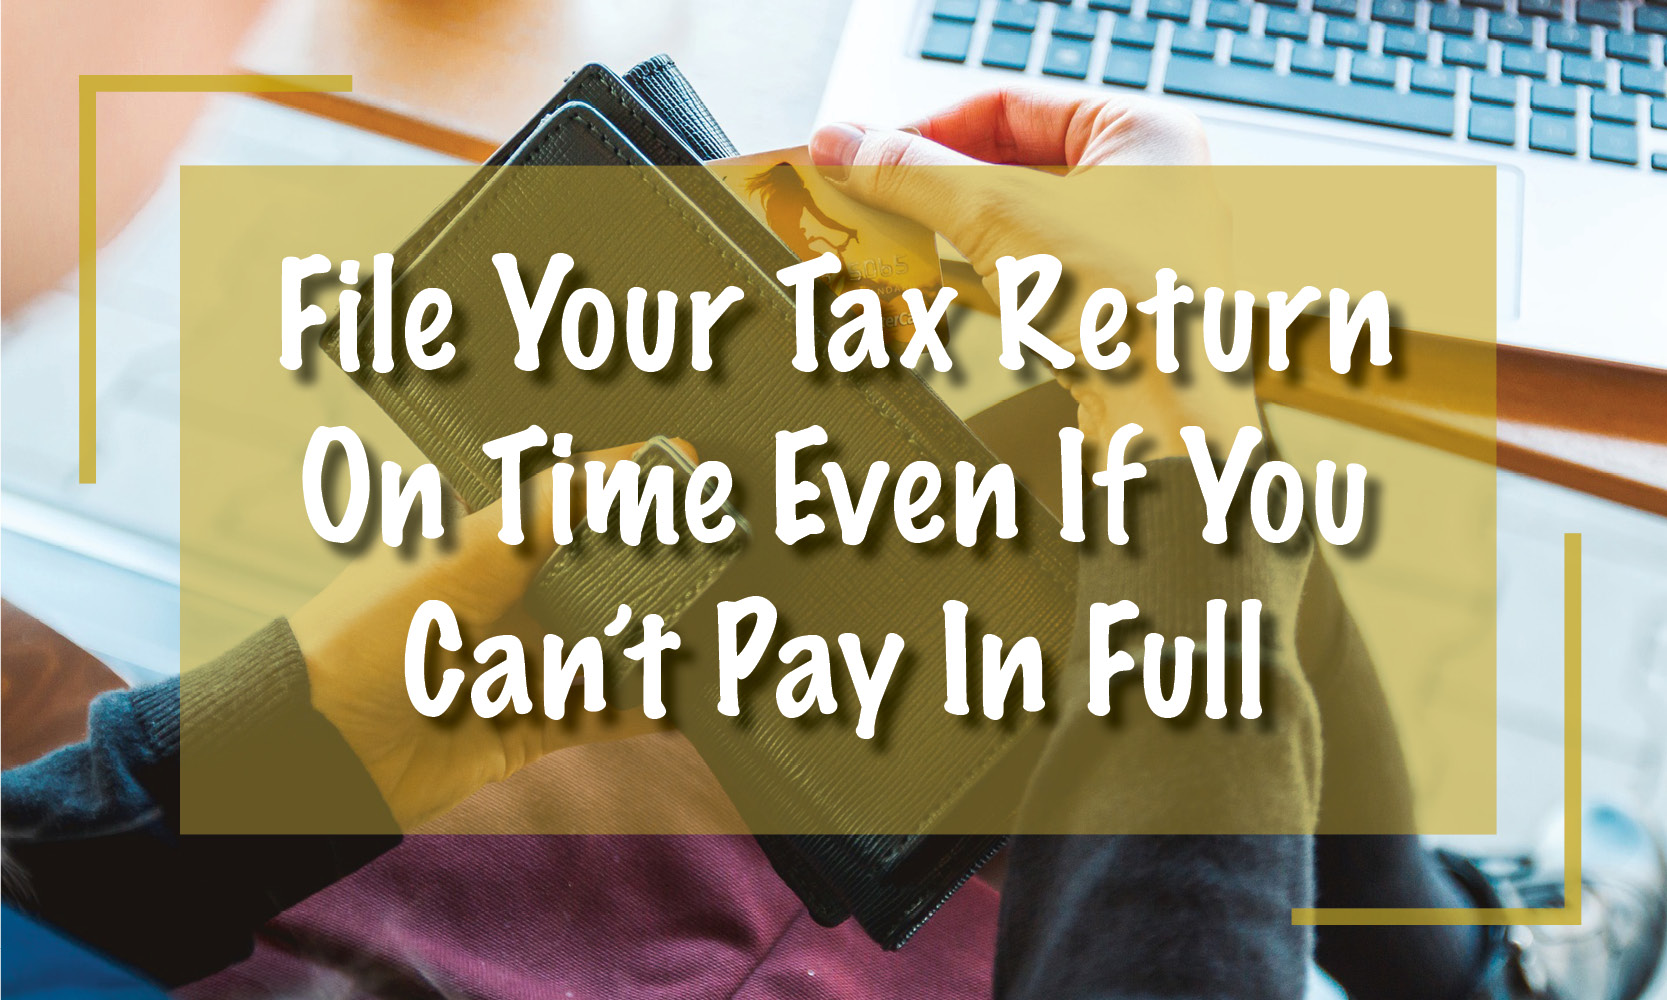 File Your Tax Return On Time Even If You Can't Pay in Full